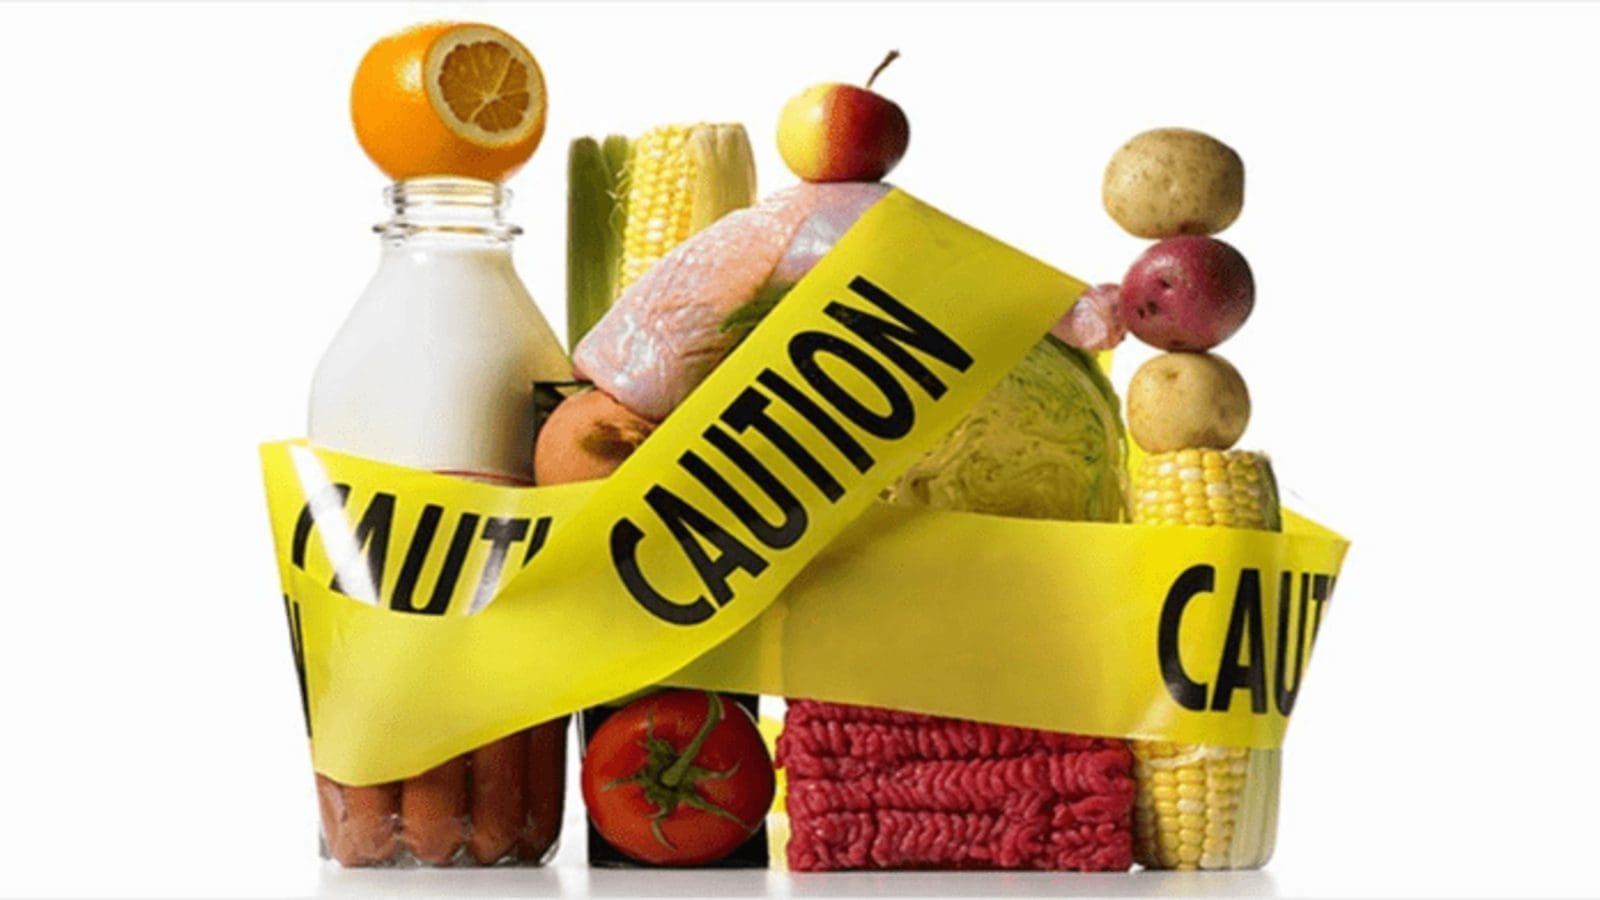 US’s Florida state partners with food safety watchdog to curb foodborne disease outbreaks